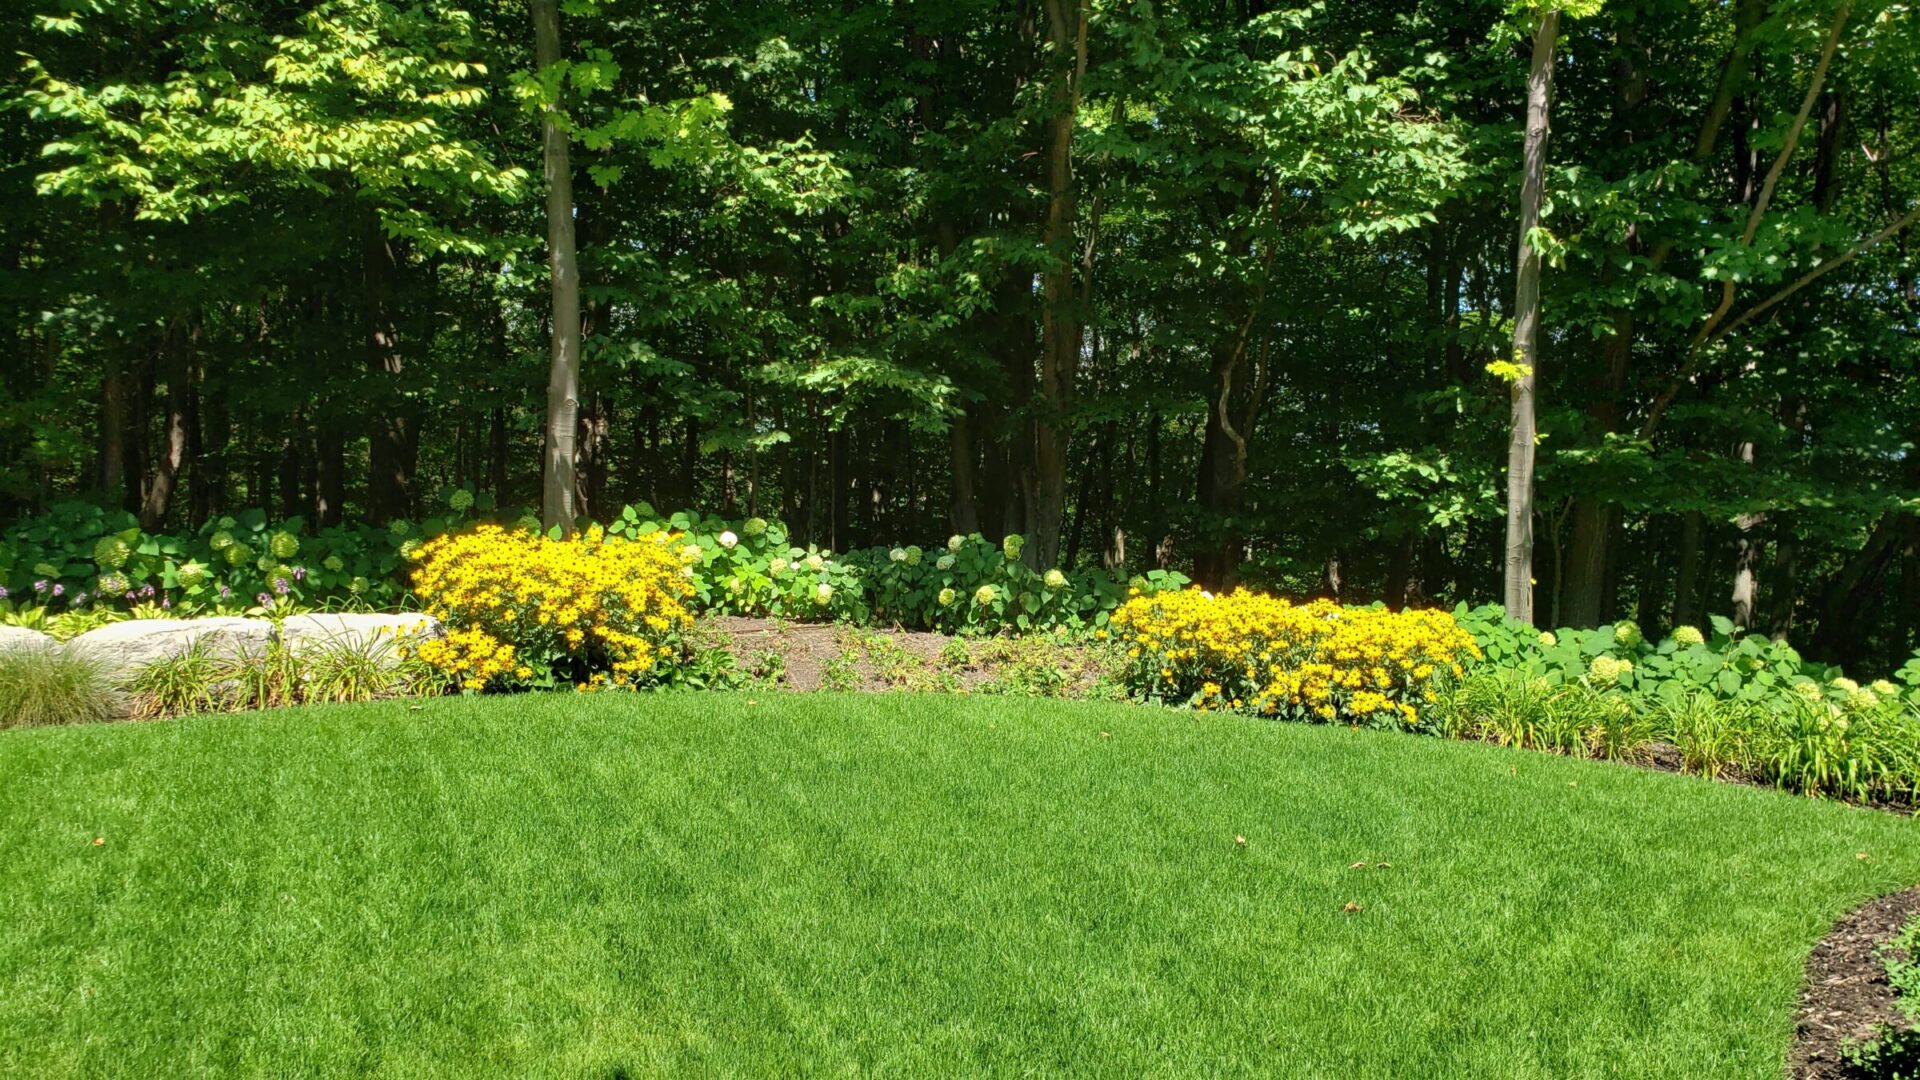 Lush green lawn in foreground with vibrant yellow flowers and shrubs against a backdrop of dense woodland under a clear blue sky.